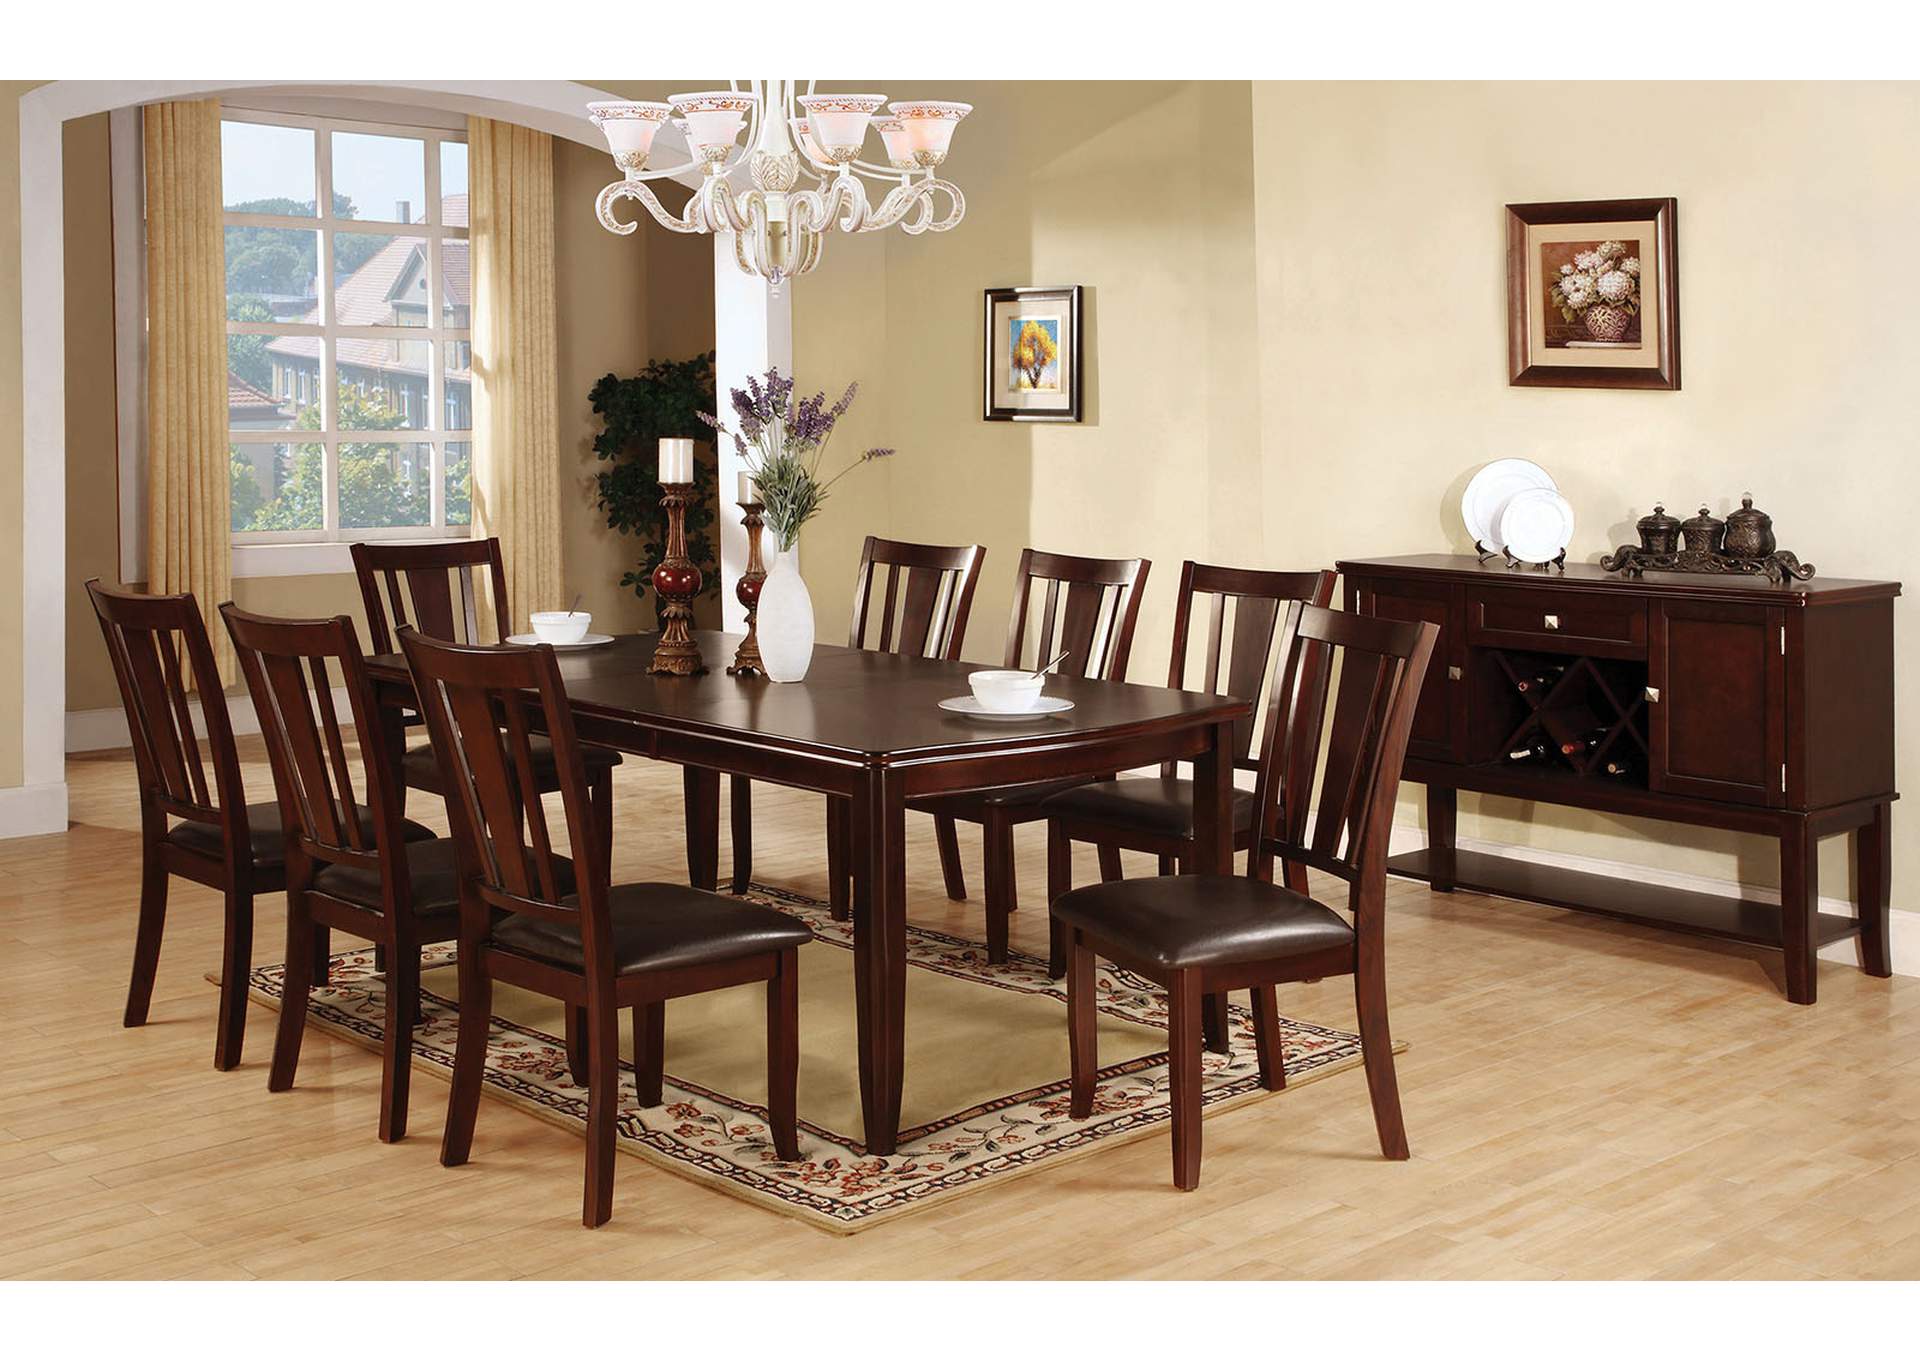 Edgewood l Espresso Extension Leaf Dining Table w/8 Side Chair,Furniture of America